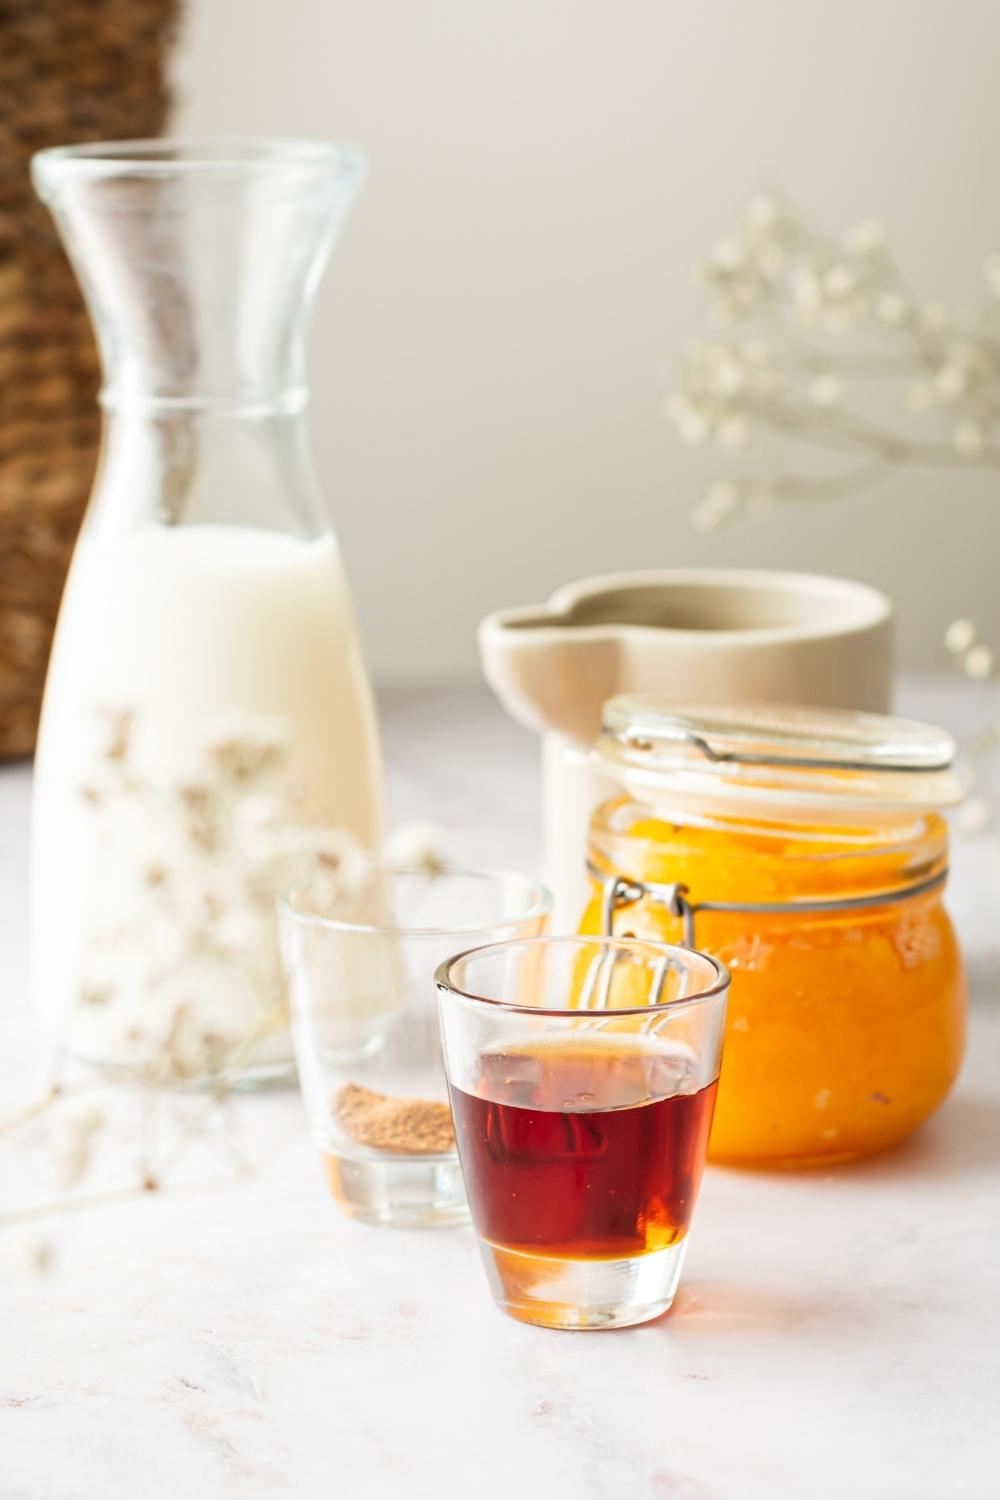 A jar of maple syrup, a glass of pumpkin pie spice, a glass of half and half, and a glass of pumpkin puree all on a white counter.